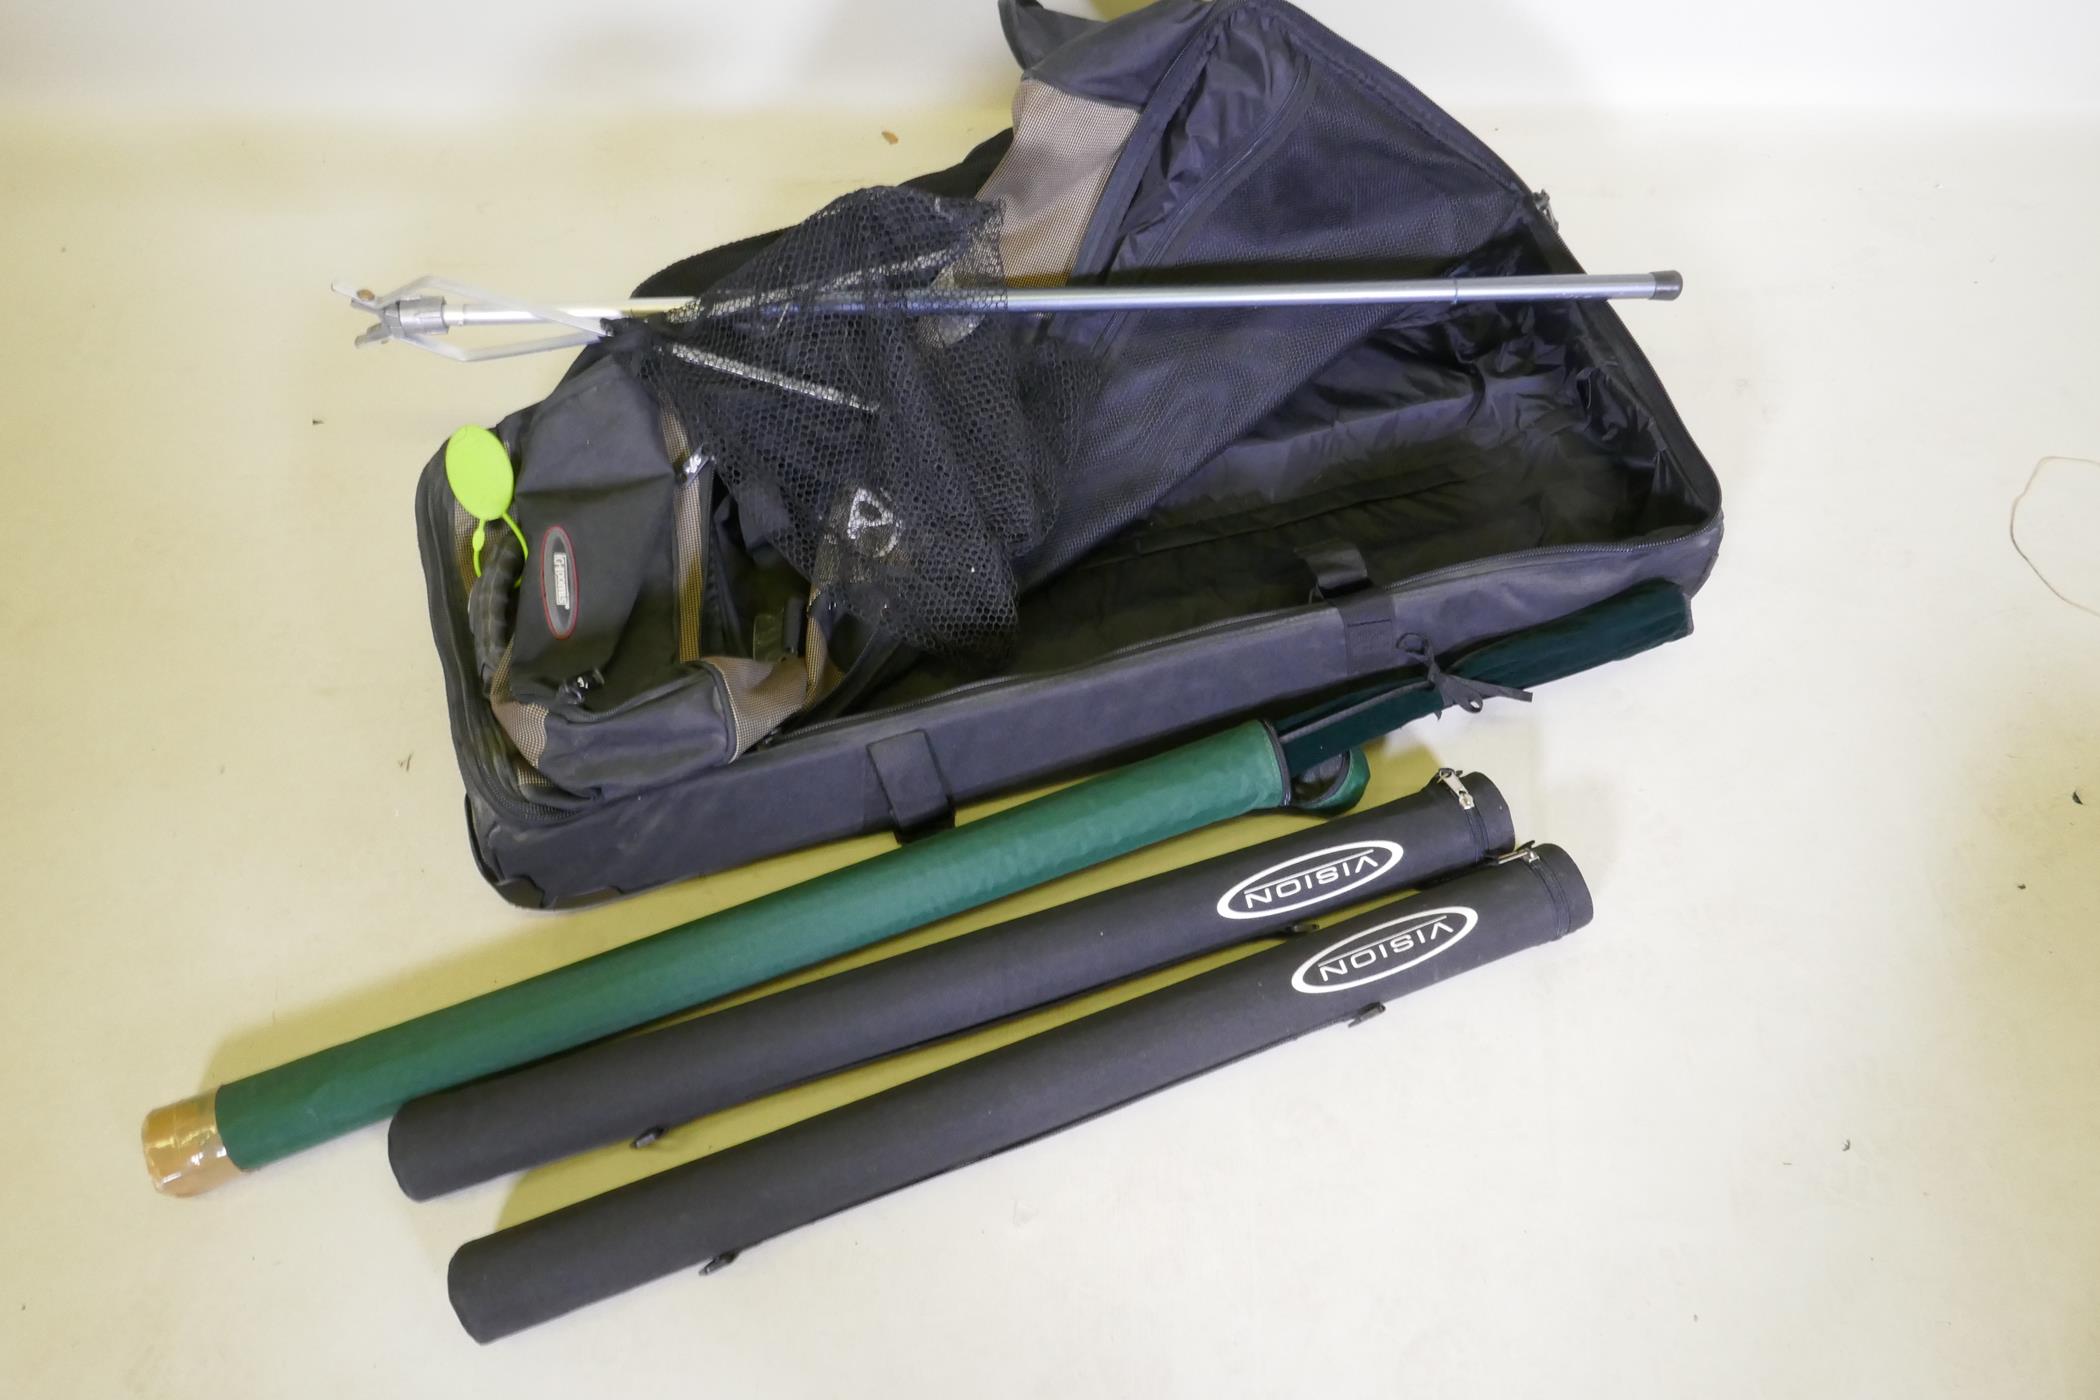 Fly fishing gear, lures, reels, tools and rods, Scierra SST, Brian Peterson Drifter Master Fly, - Image 14 of 14